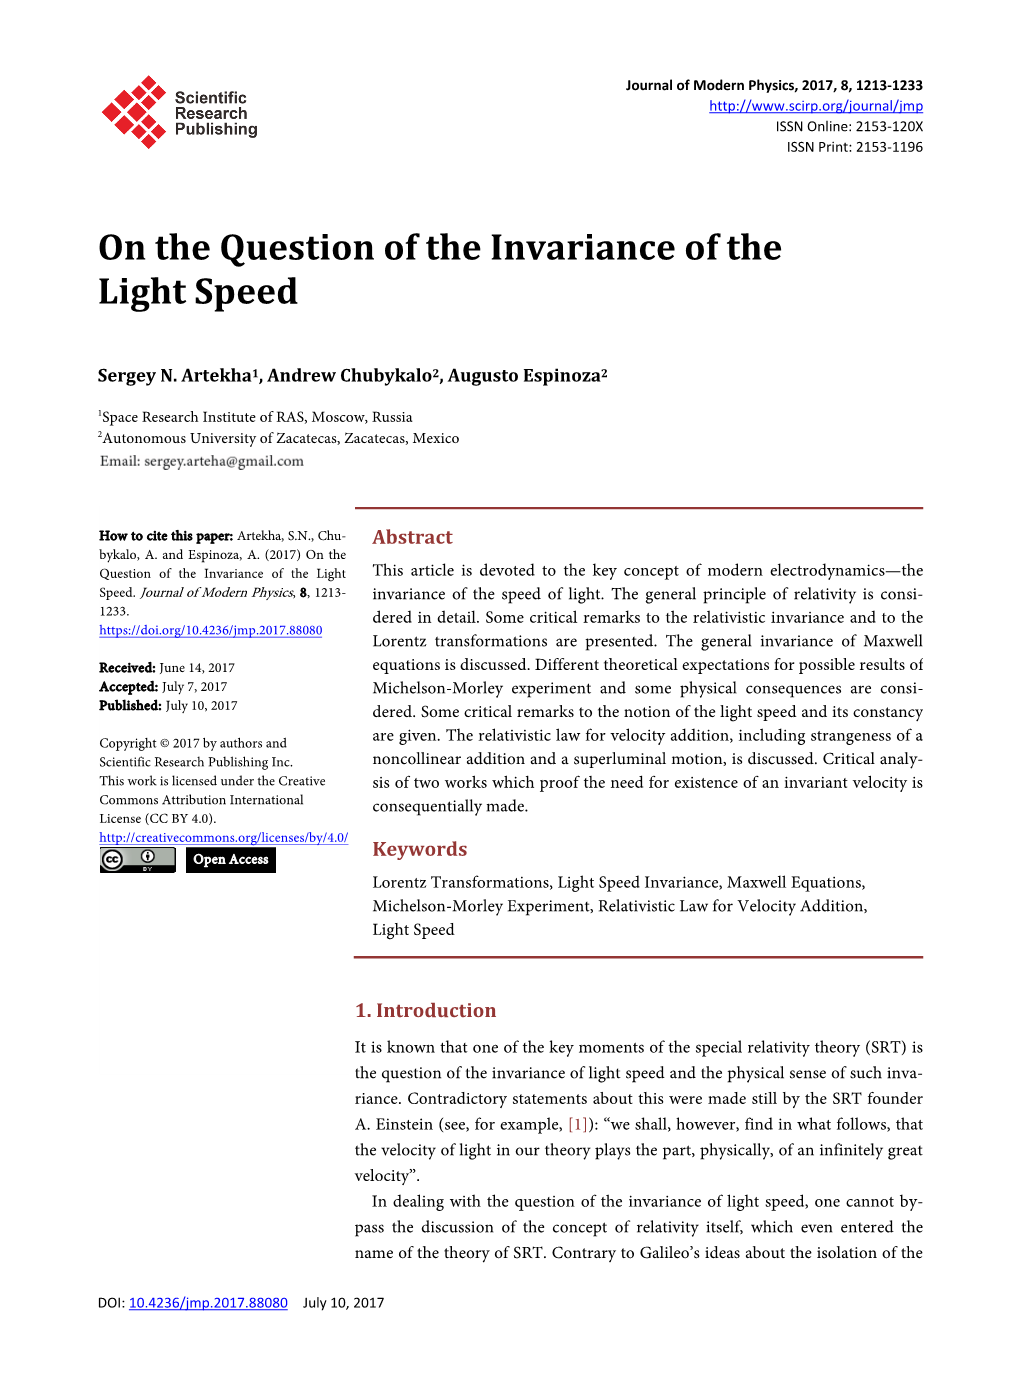 On the Question of the Invariance of the Light Speed